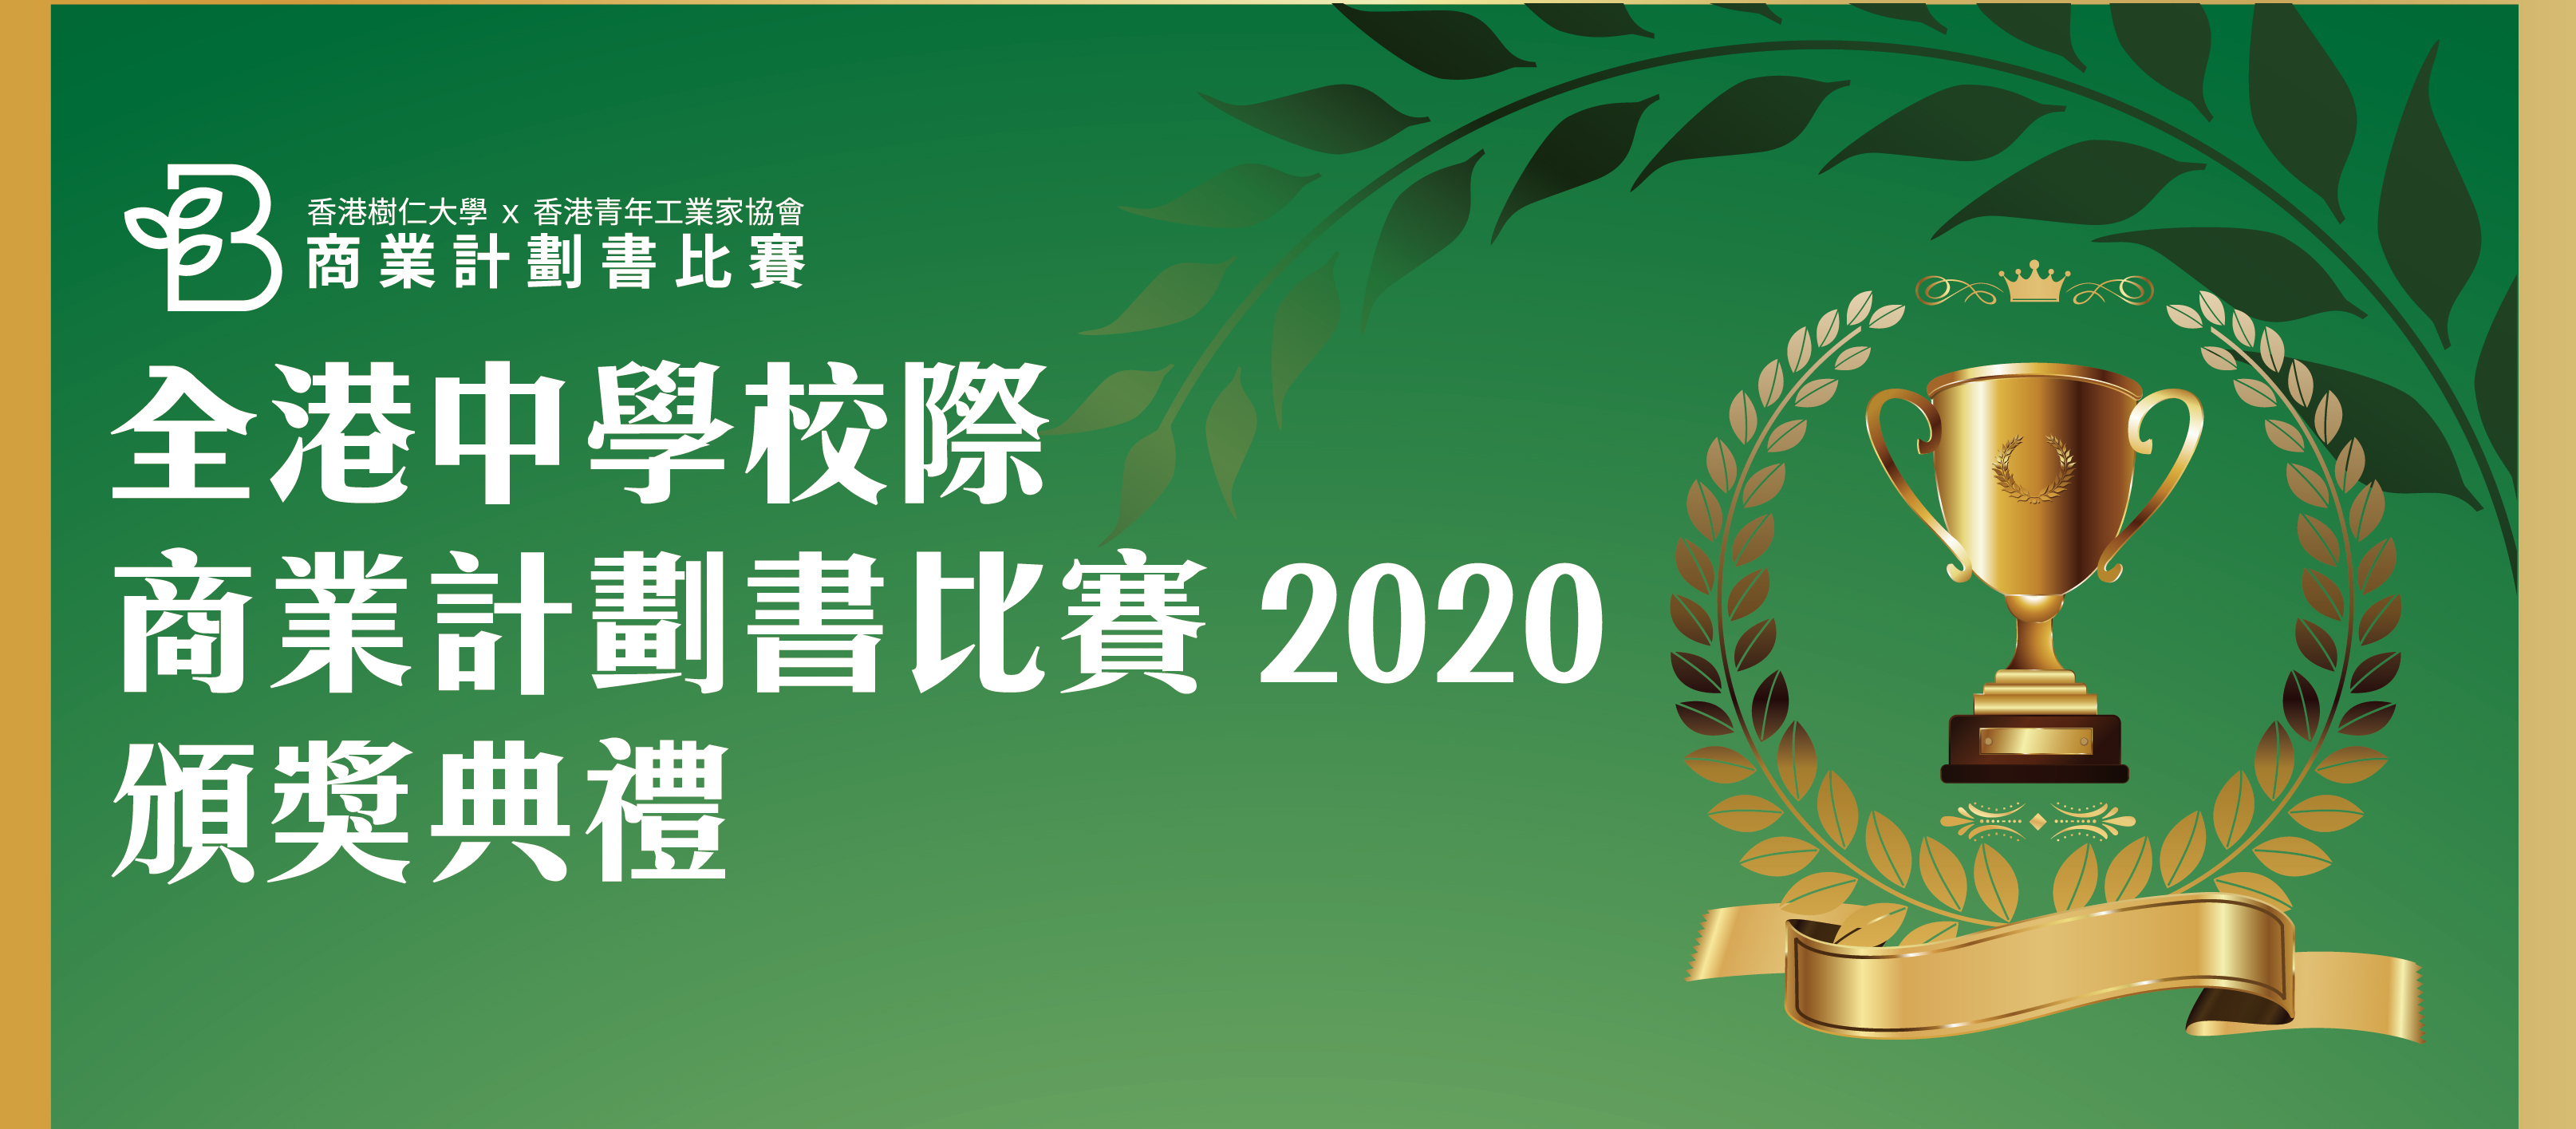 SYU x YICY Business Proposal Competition Award Ceremony 2020